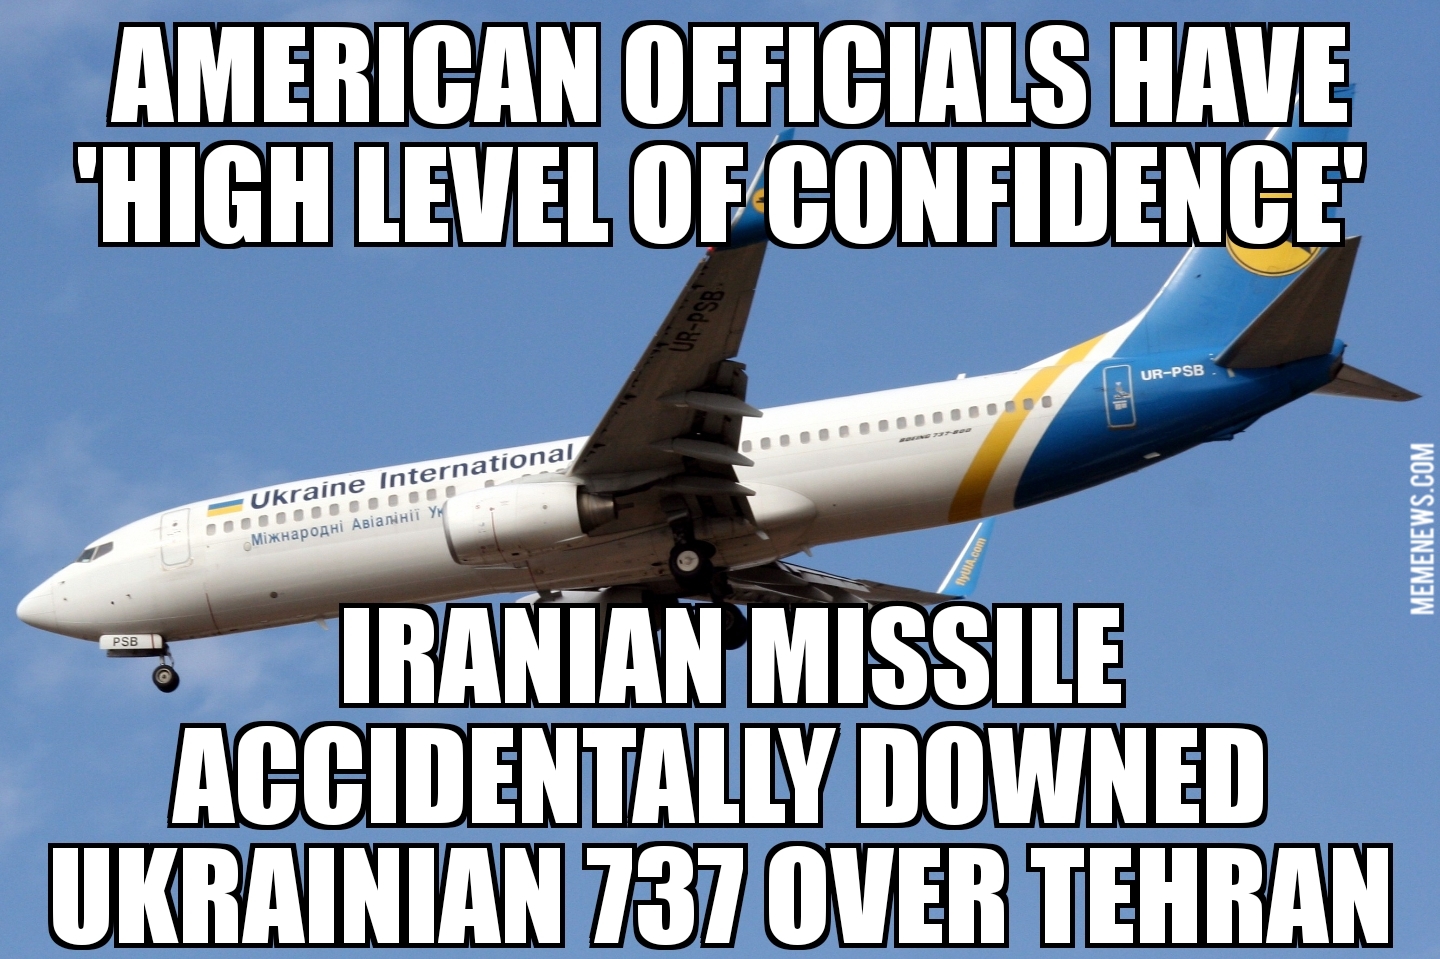 U.S. officials: Ukrainian 737 downed by Iran missile